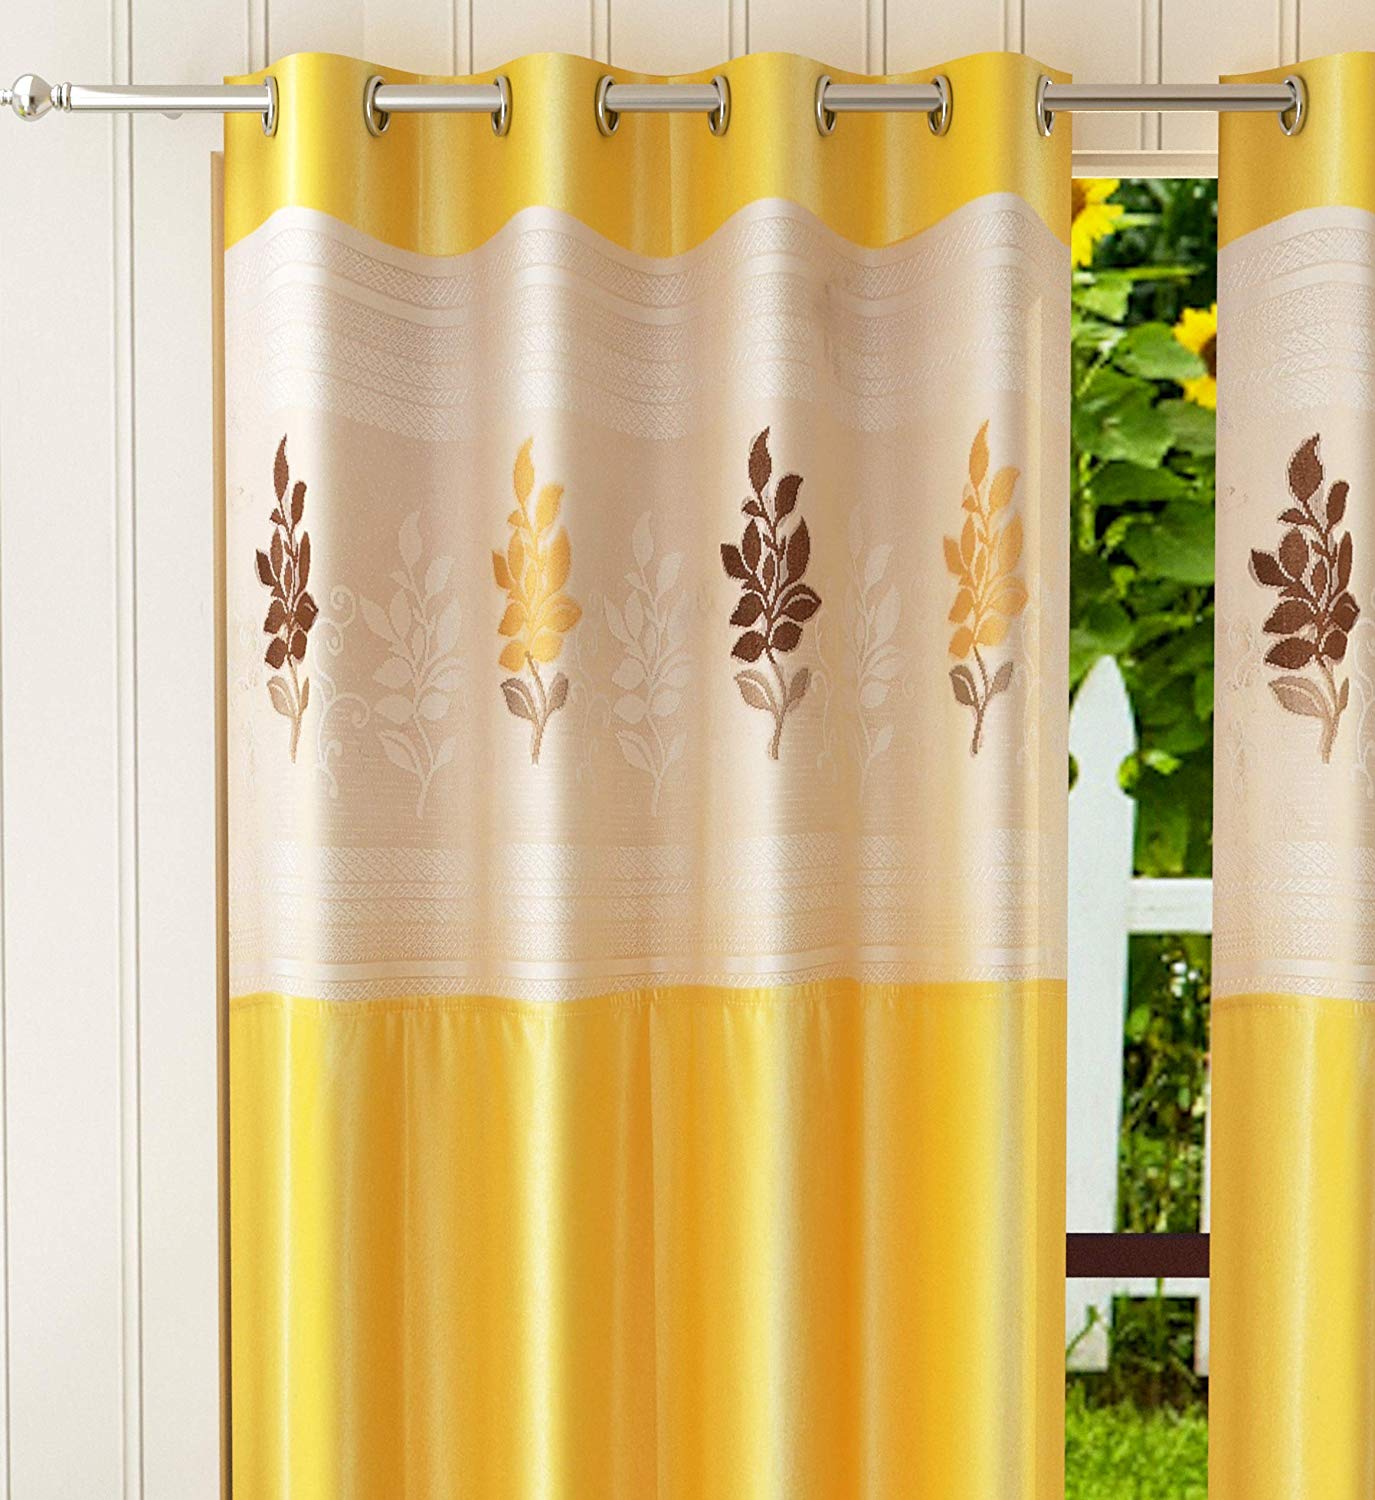 Nitin LaVichitra Polyester Door Curtain with Floral Net (7ft, Yellow) -2 Pieces